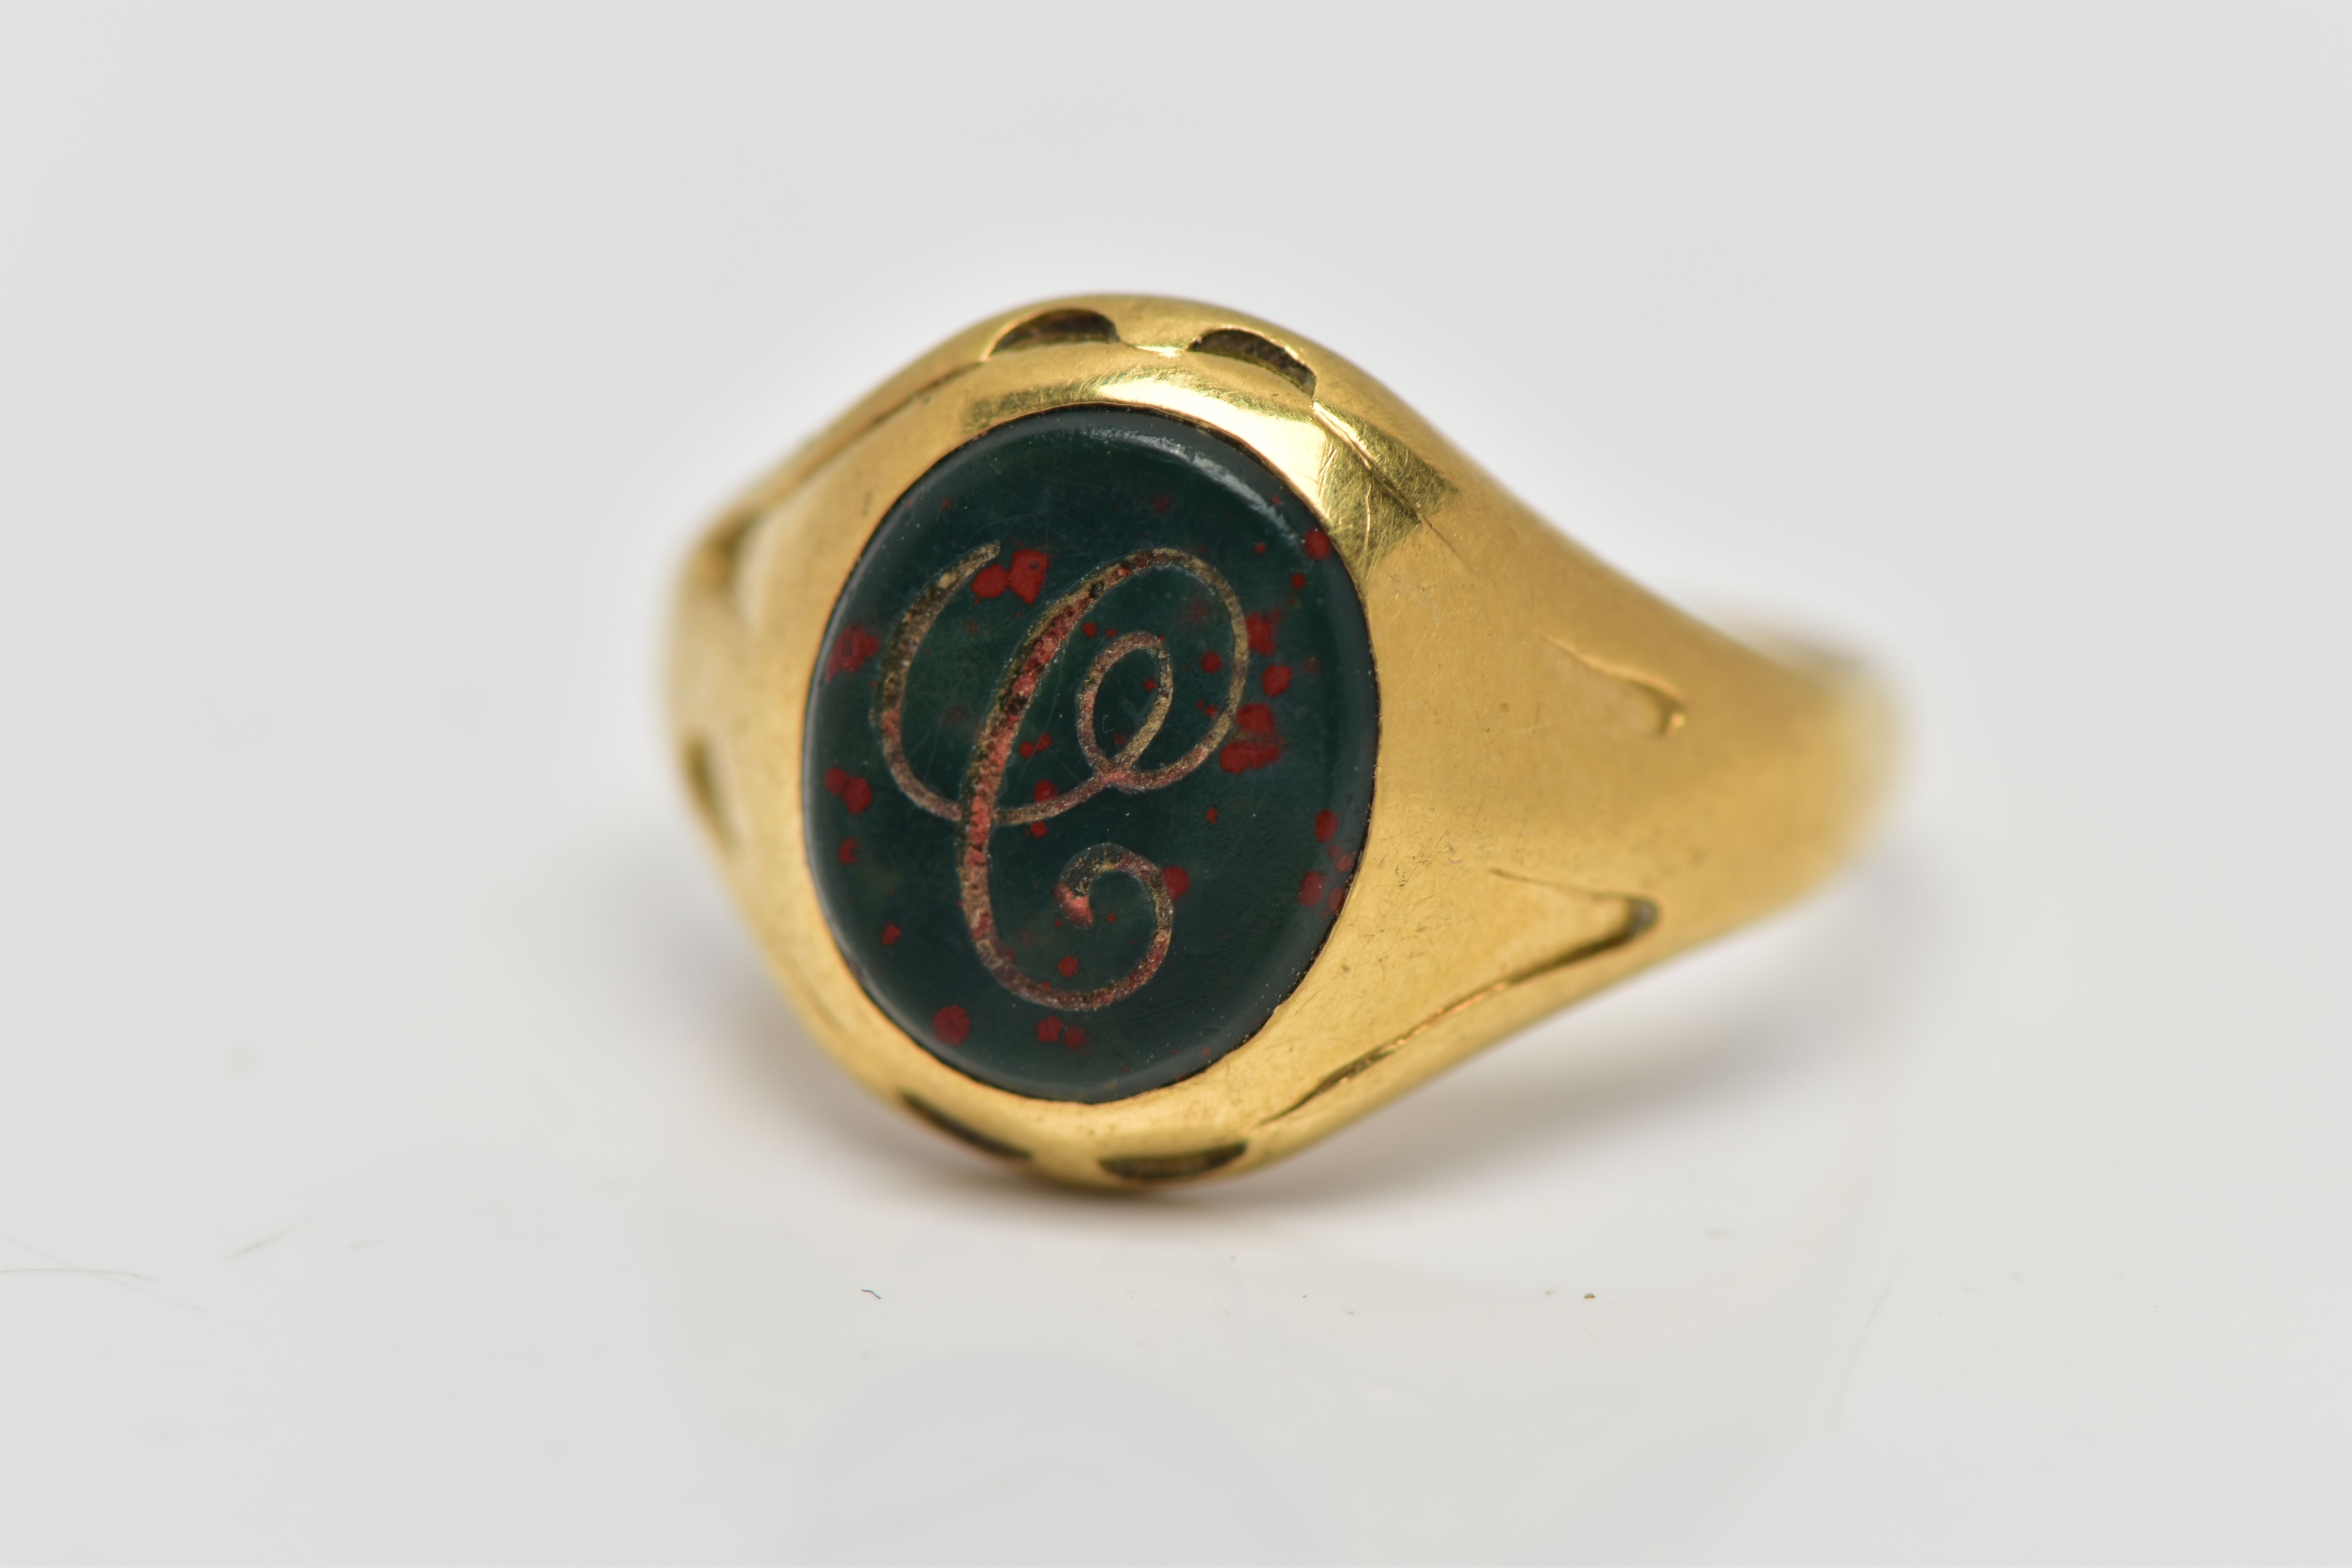 AN 18CT GOLD SIGNET RING, set with an oval bloodstone insert with an engraved initial 'C', worn